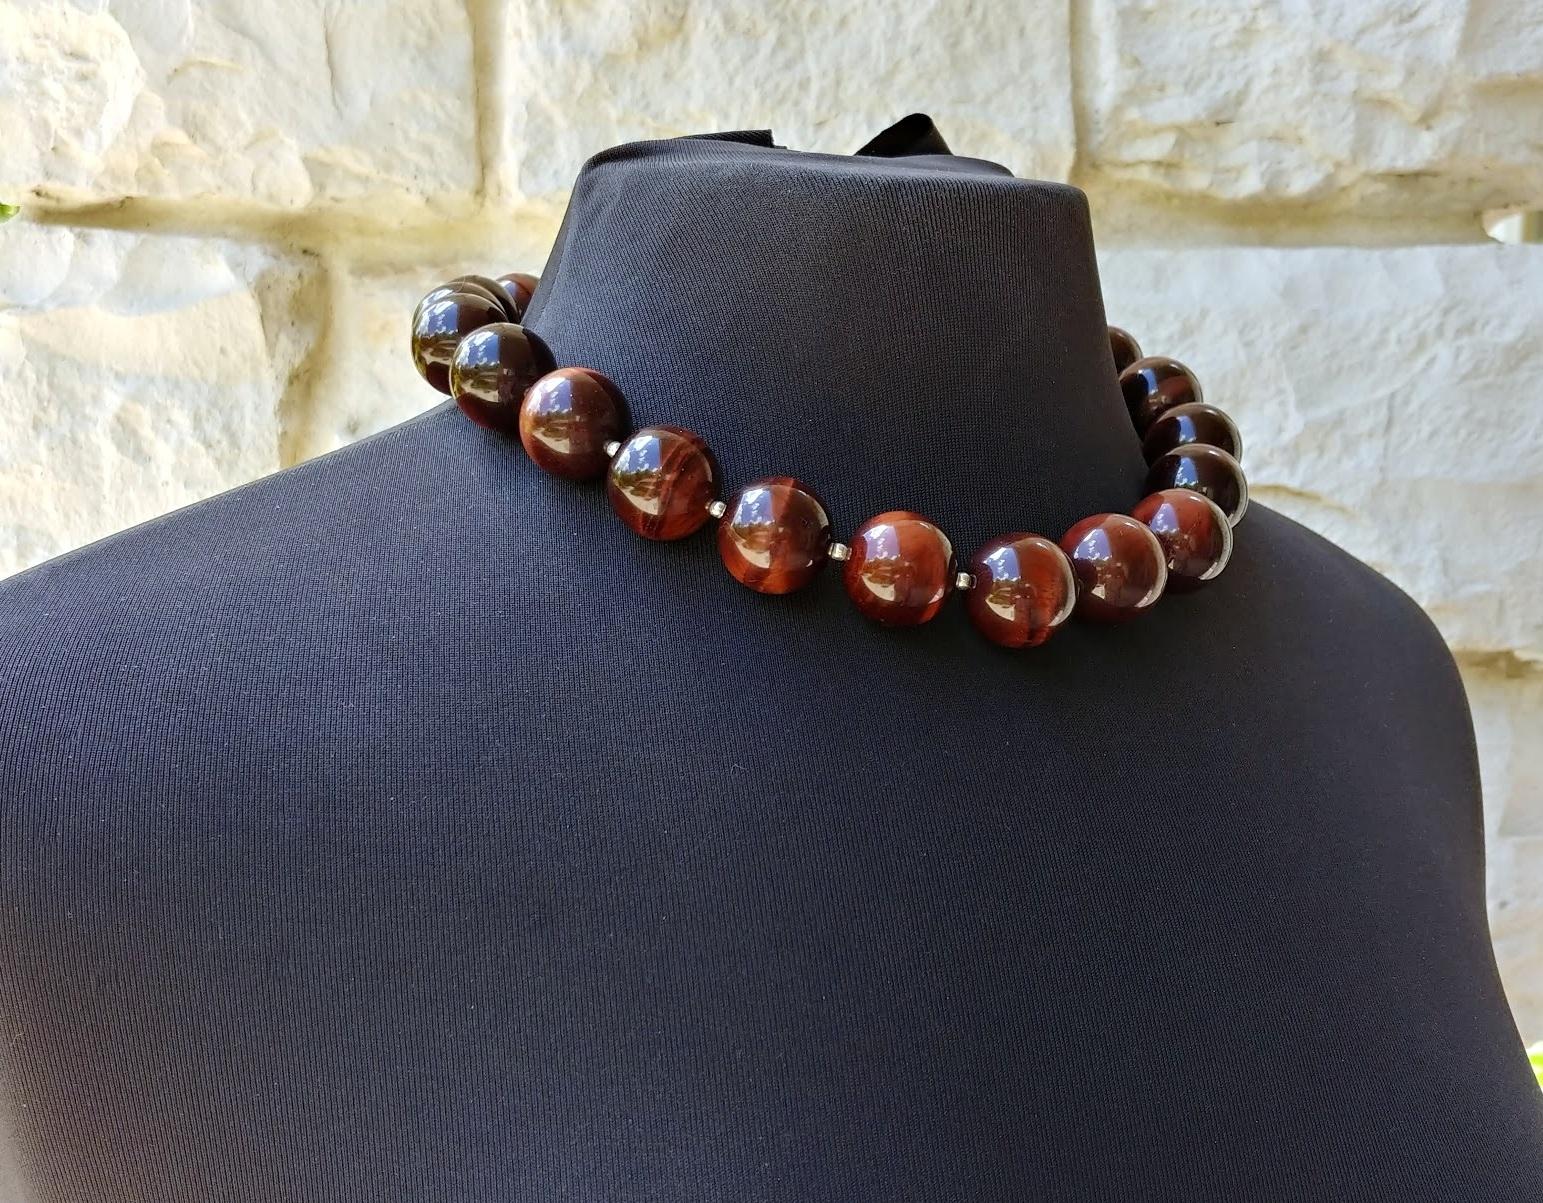 The length of the necklace is 18.5 inches (47 cm). The size of the very high-quality round beads is 20 mm.
The tones of the beads are a wondrous silky chocolate-red, luxurious — gorgeous warm shade of autumn.
The tiger eye was named for the